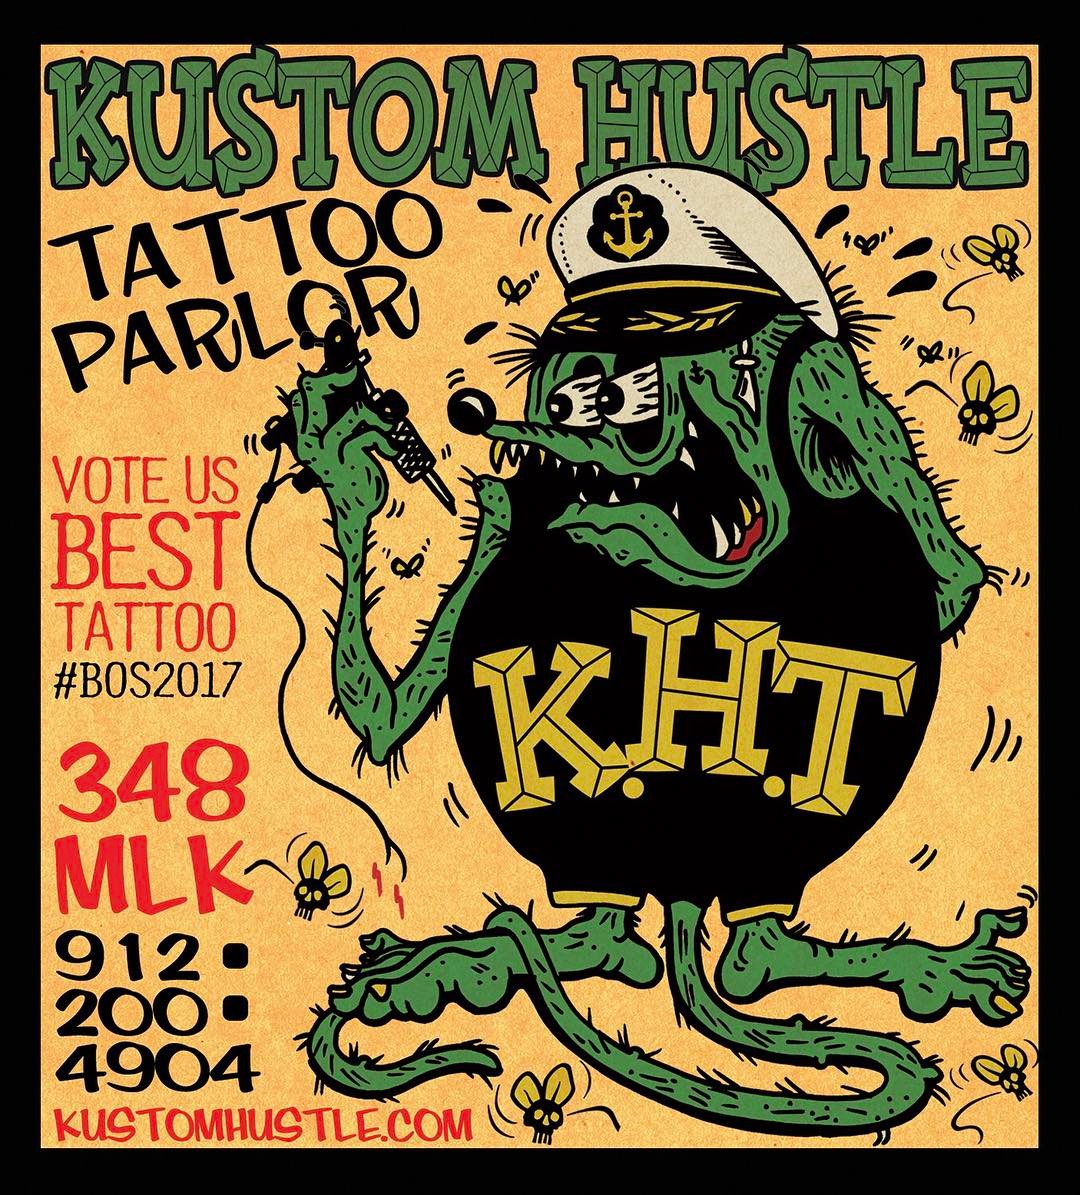 Voting ends next Monday! Click the link in our bio and vote us best tattoo shop. #kht #bos2017